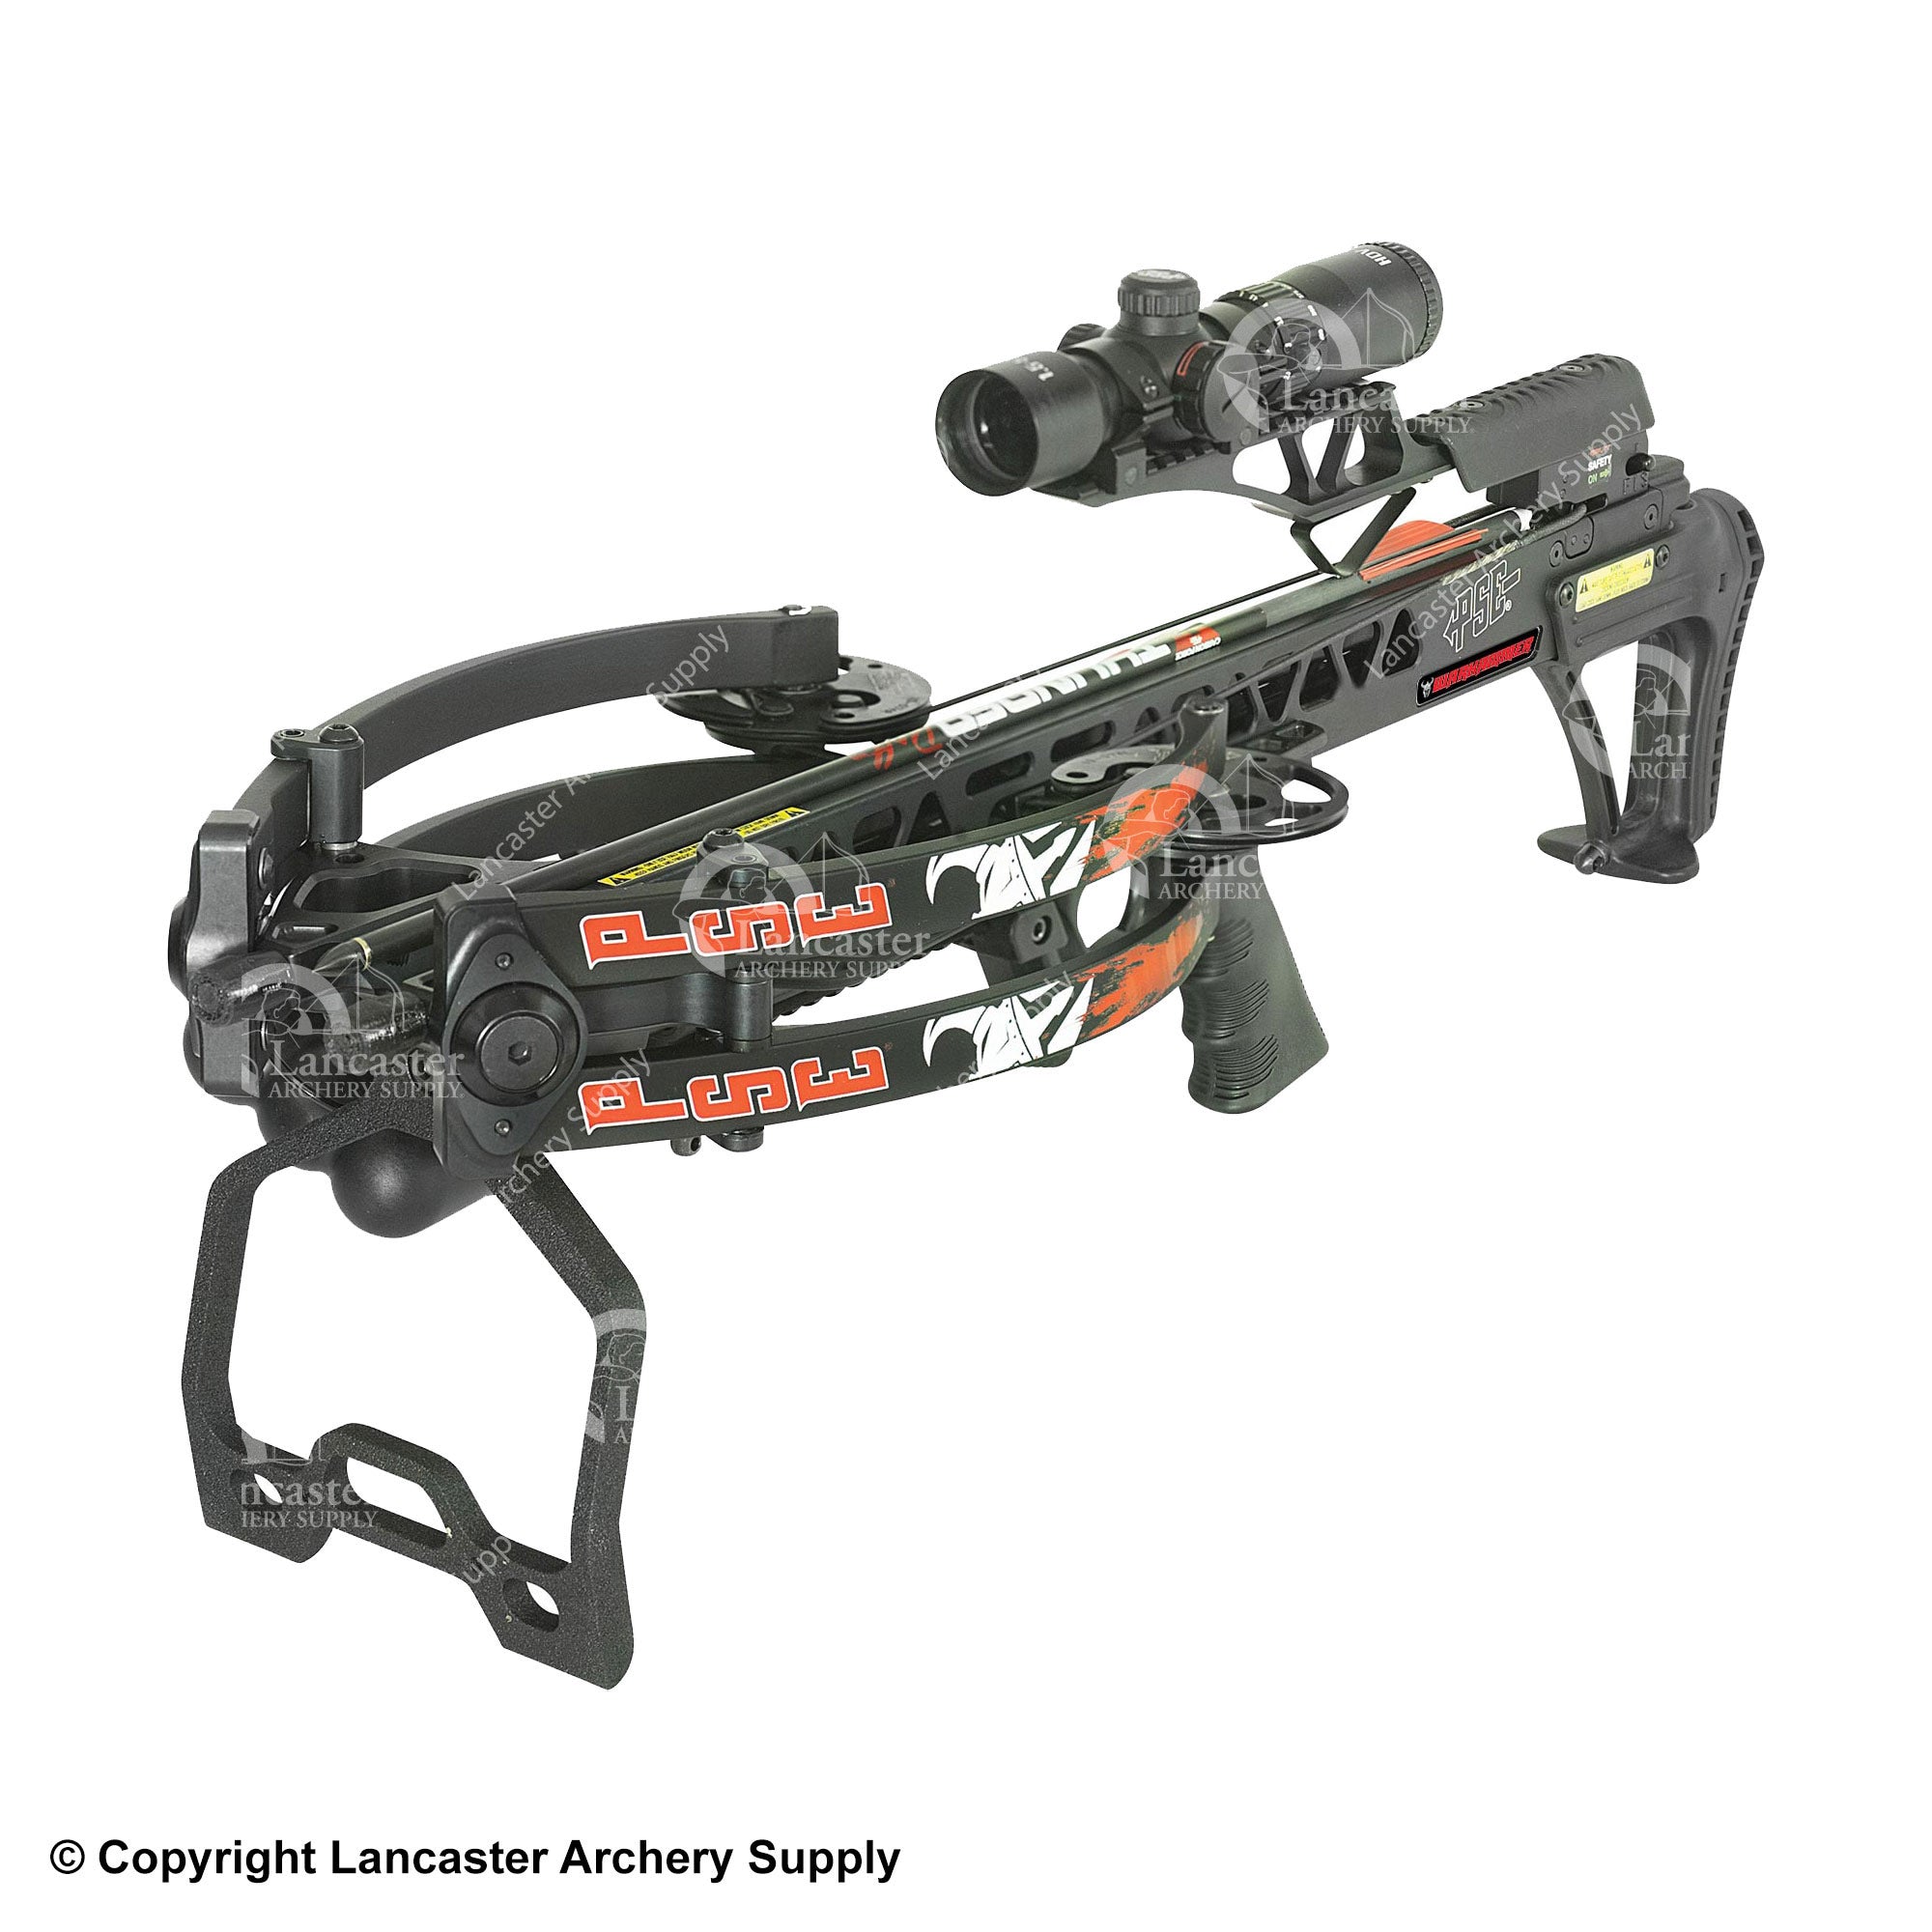 PSE Warhammer Crossbow Package